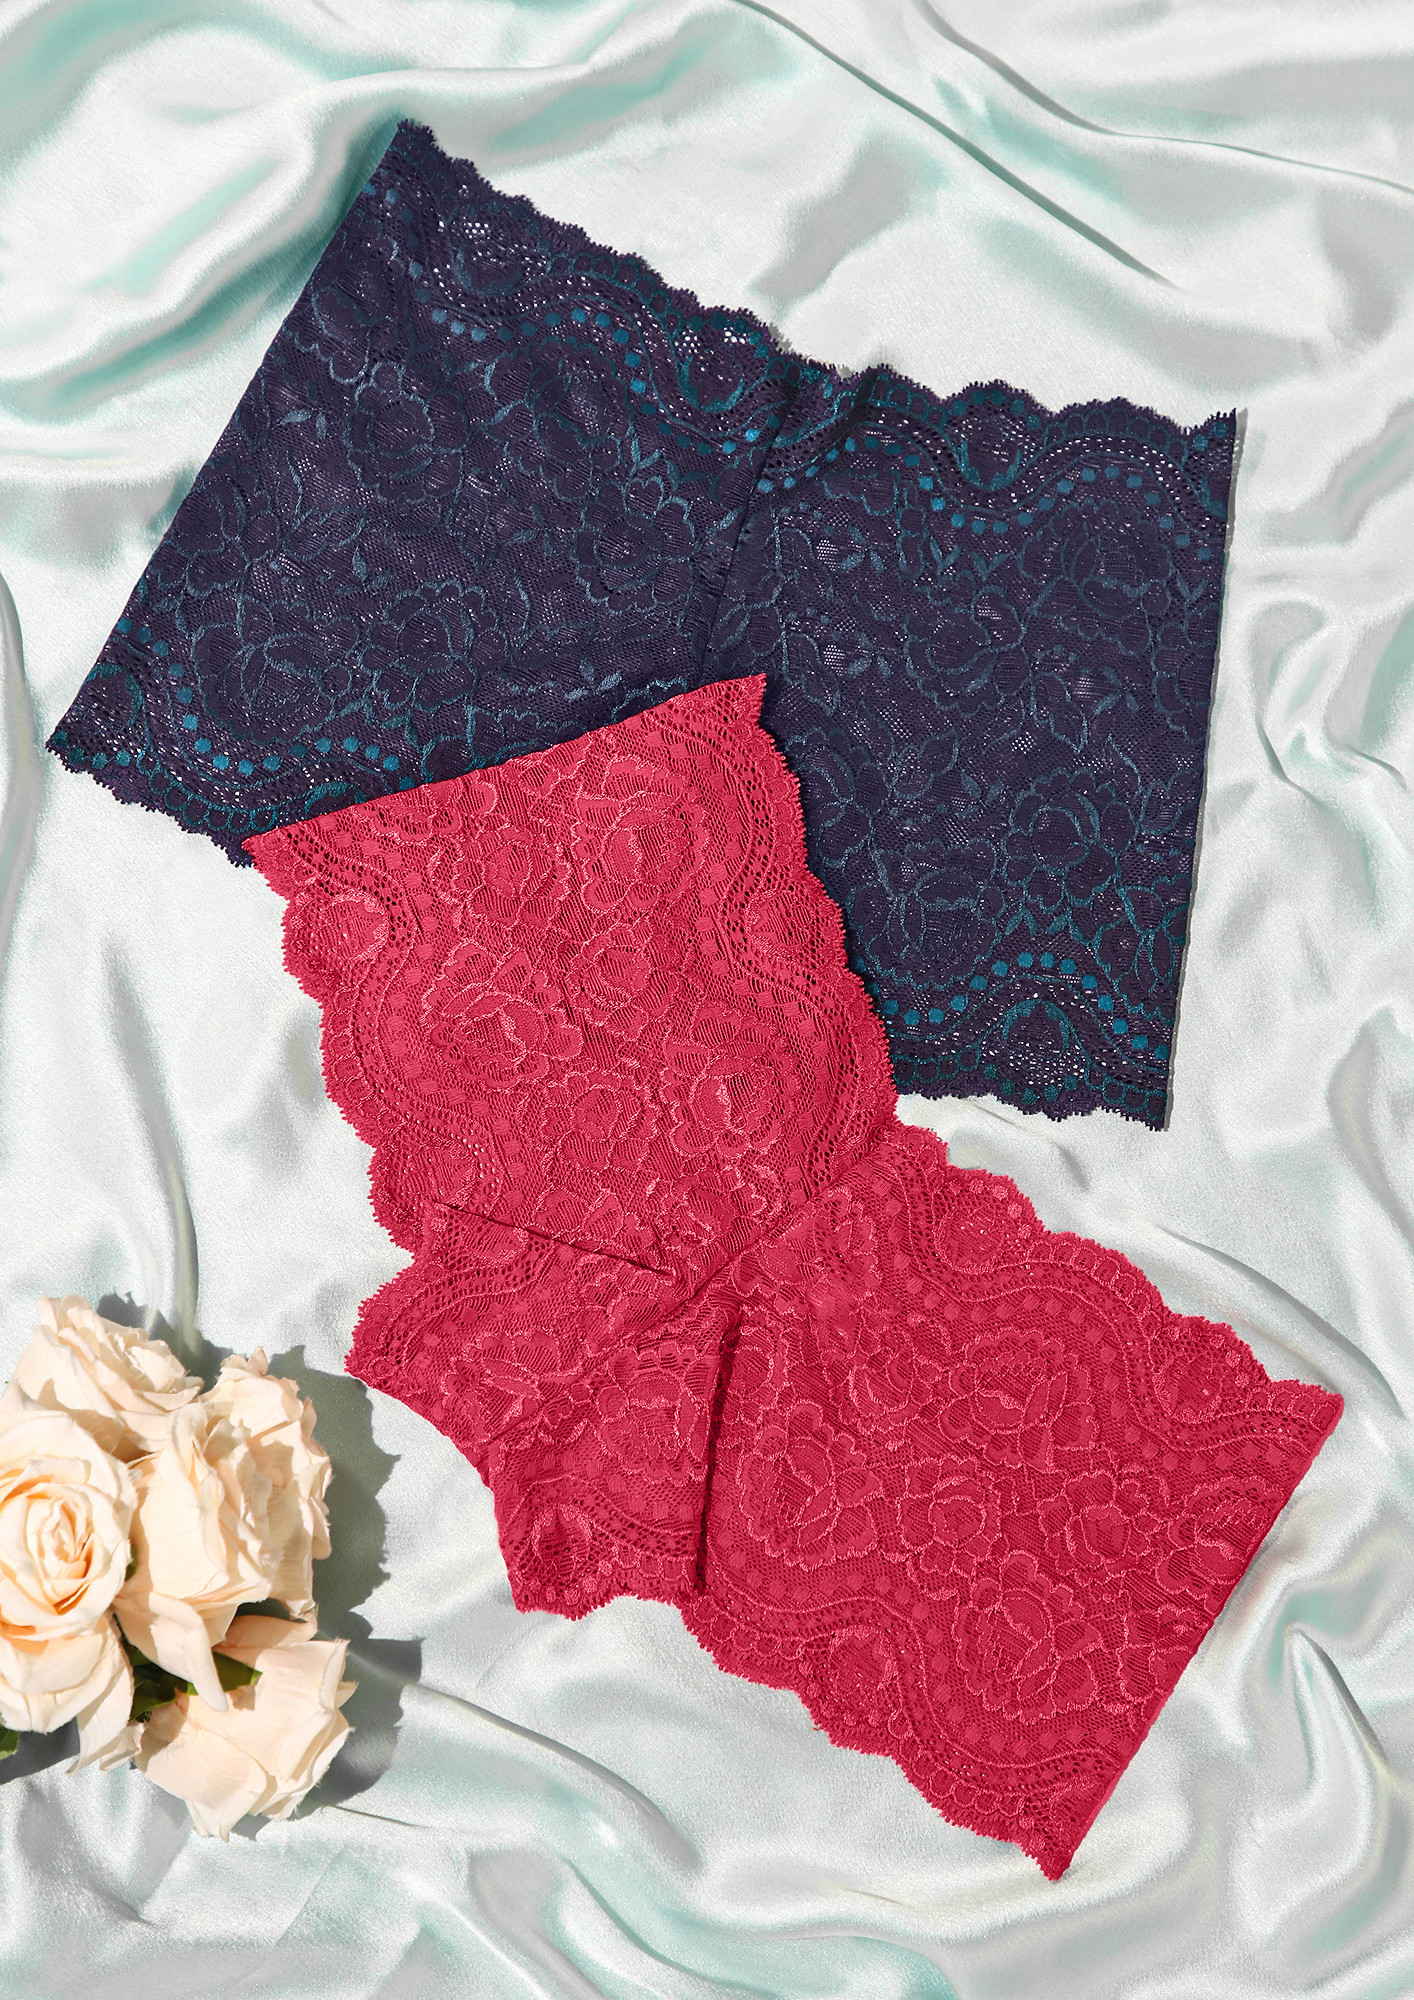 COMFORT-ATTACHED-IN-MY-MID-RISE, SOLID, PRINTED, NAVY & PINK, LACE-DETAIL, NYLON, BOYSHORT BRIEF SET (PACK OF 2)